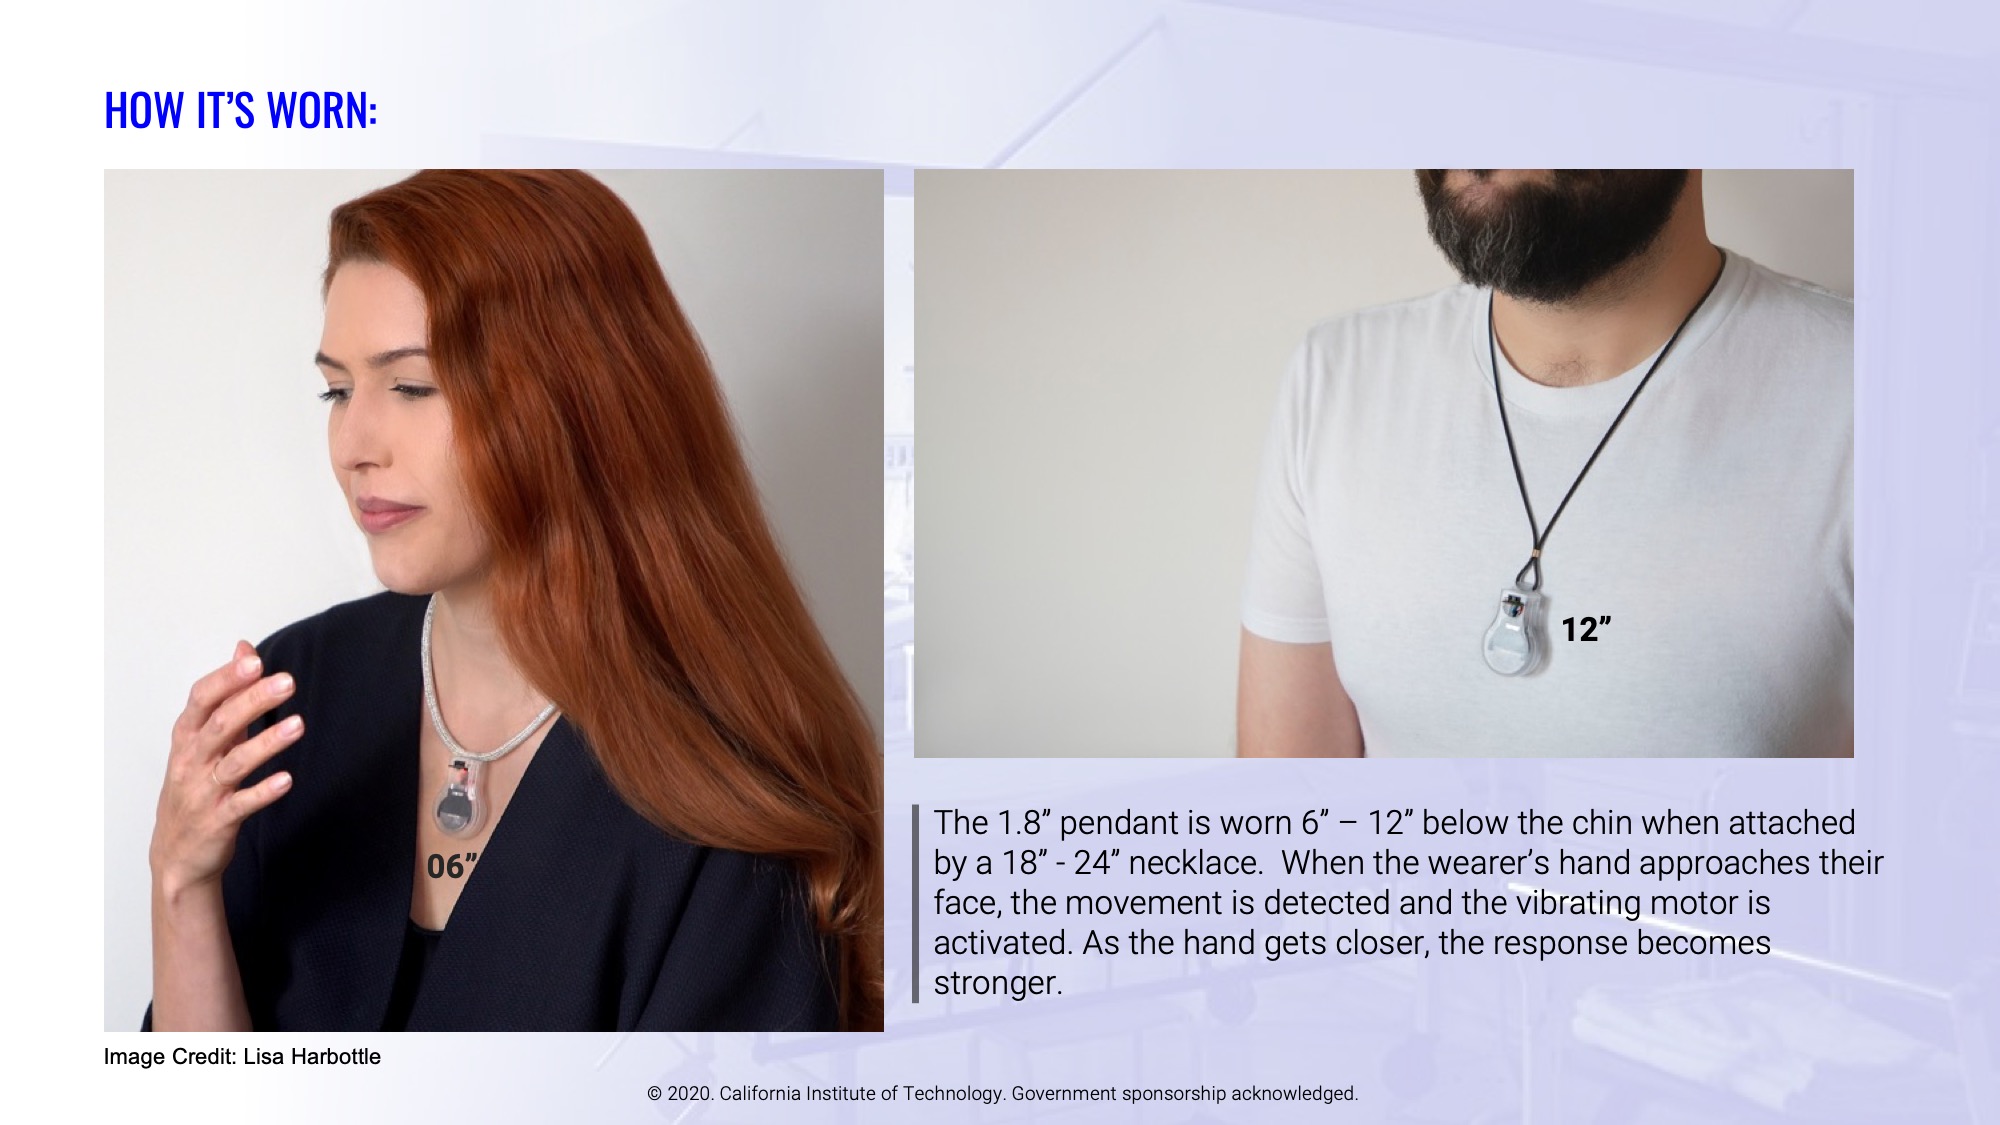 The 1.8” pendant is worn 6” – 12” below the chin when attached by a 18” - 24” necklace.  When the wearer’s hand approaches their face, the movement is detected and the vibrating motor is activated. As the hand gets closer, the response becomes stronger.